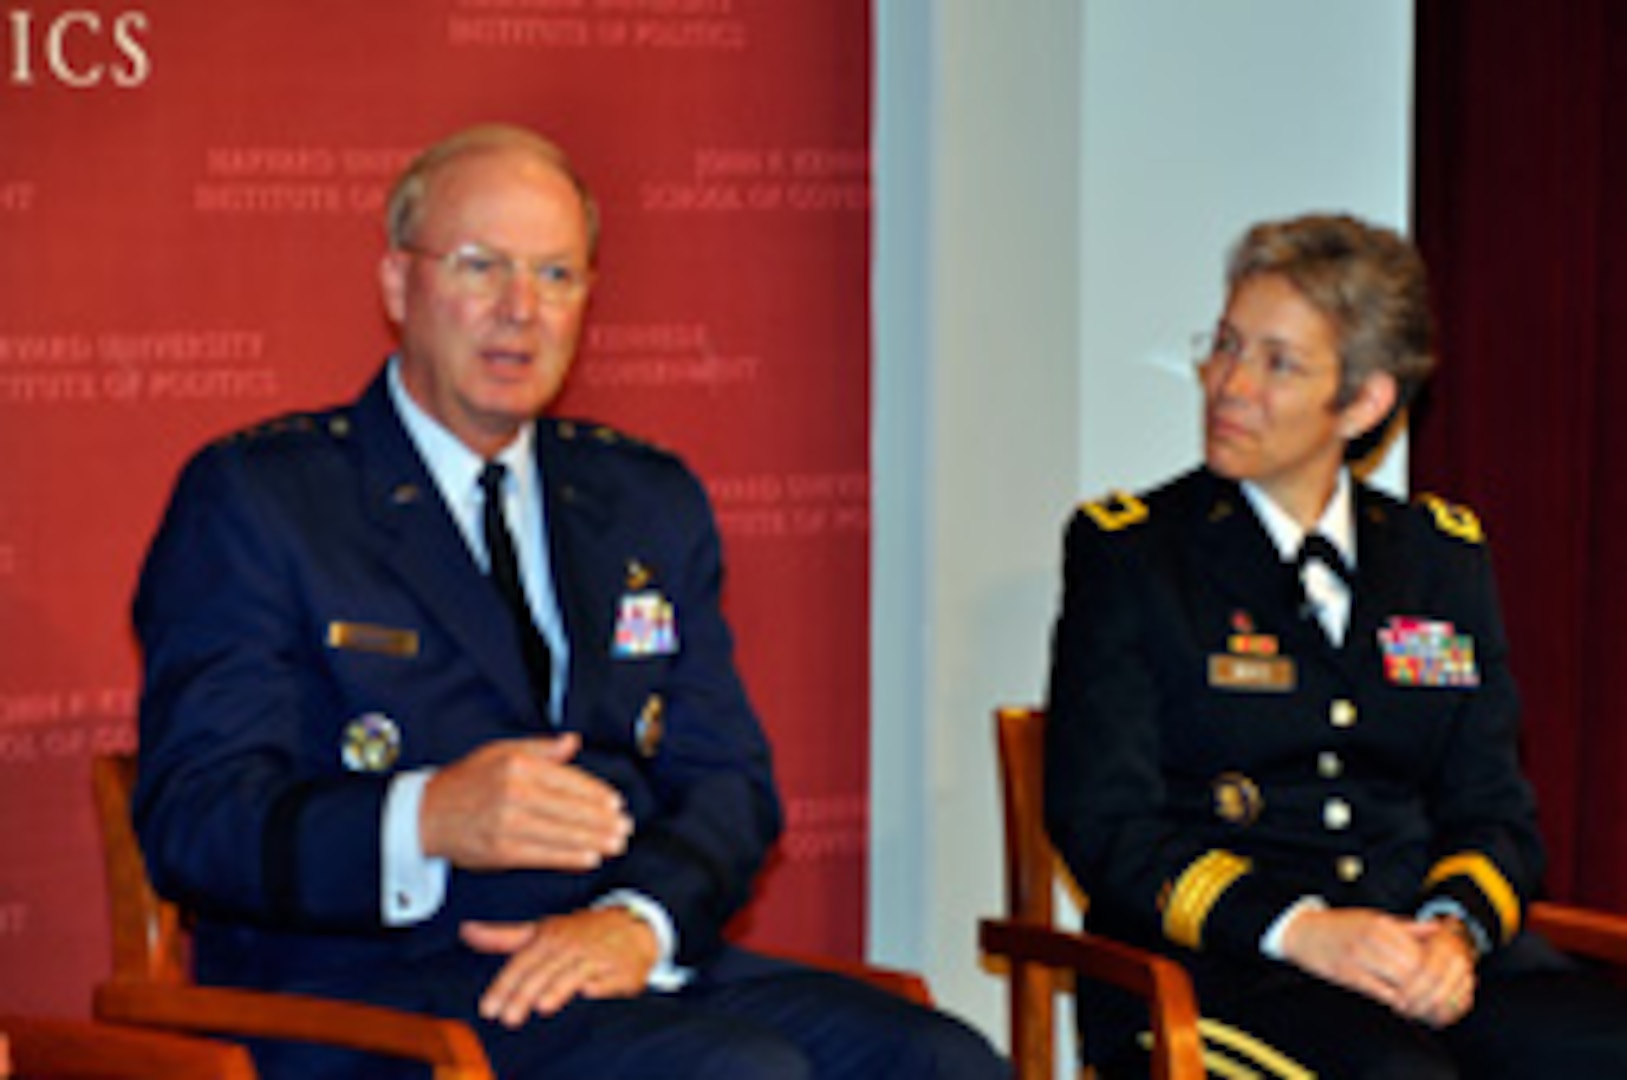 Air Force Gen. Craig McKinley, the chief of the National Guard Bureau, answers a question as Army Brig. Gen. Julie Bentz, director of strategic capabilities policy, National Security Council, listens during a panel discussion on the military's role in disaster response at Harvard University's John F. Kennedy School of Government recently. The panel was the conclusion of the second annual General and Flag Officer Homeland Security Executive Seminar at Harvard University. Fifty professionals throughout the country from the rank of colonel to major general and Defense Department civilians attended the course designed to provide a broad understanding of federal and state emergencies, crisis decision making and multi-agency collaboration.